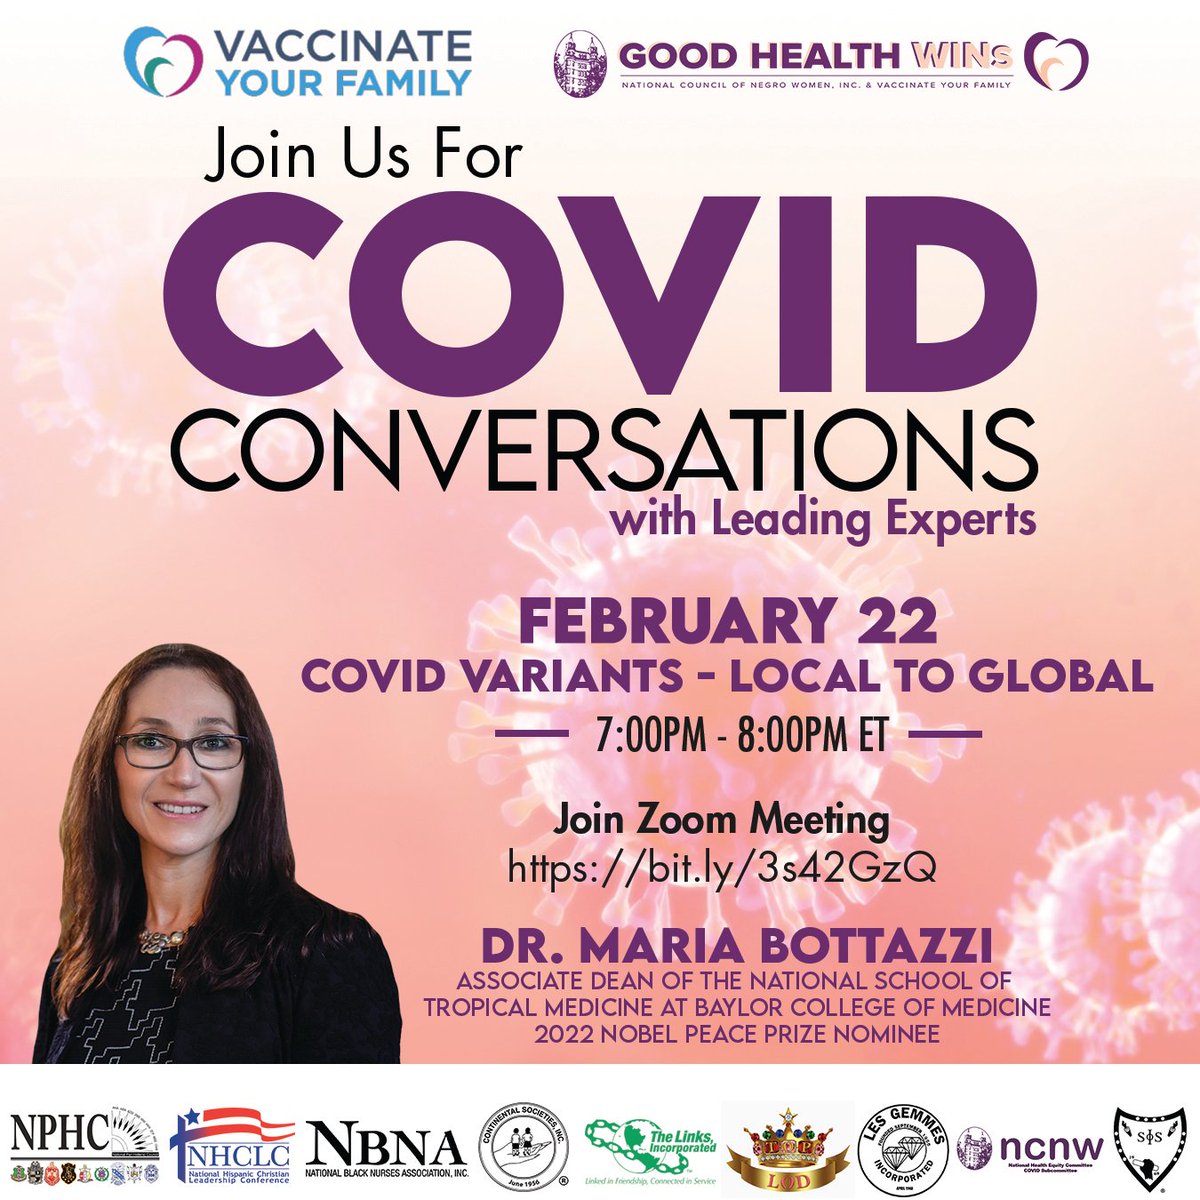 Join @goodhealthwins and @Vaxyourfam for COVID Conversations with Dr. Maria Botazzi- Associate Dean of the National School of Tropical Medicine at Baylor College of Medicine AND a Nobel Peace Prize Nominee! Date: Tues. Feb. 22nd, 7PM ET Join us! bit.ly/3s42GzQ #ghw